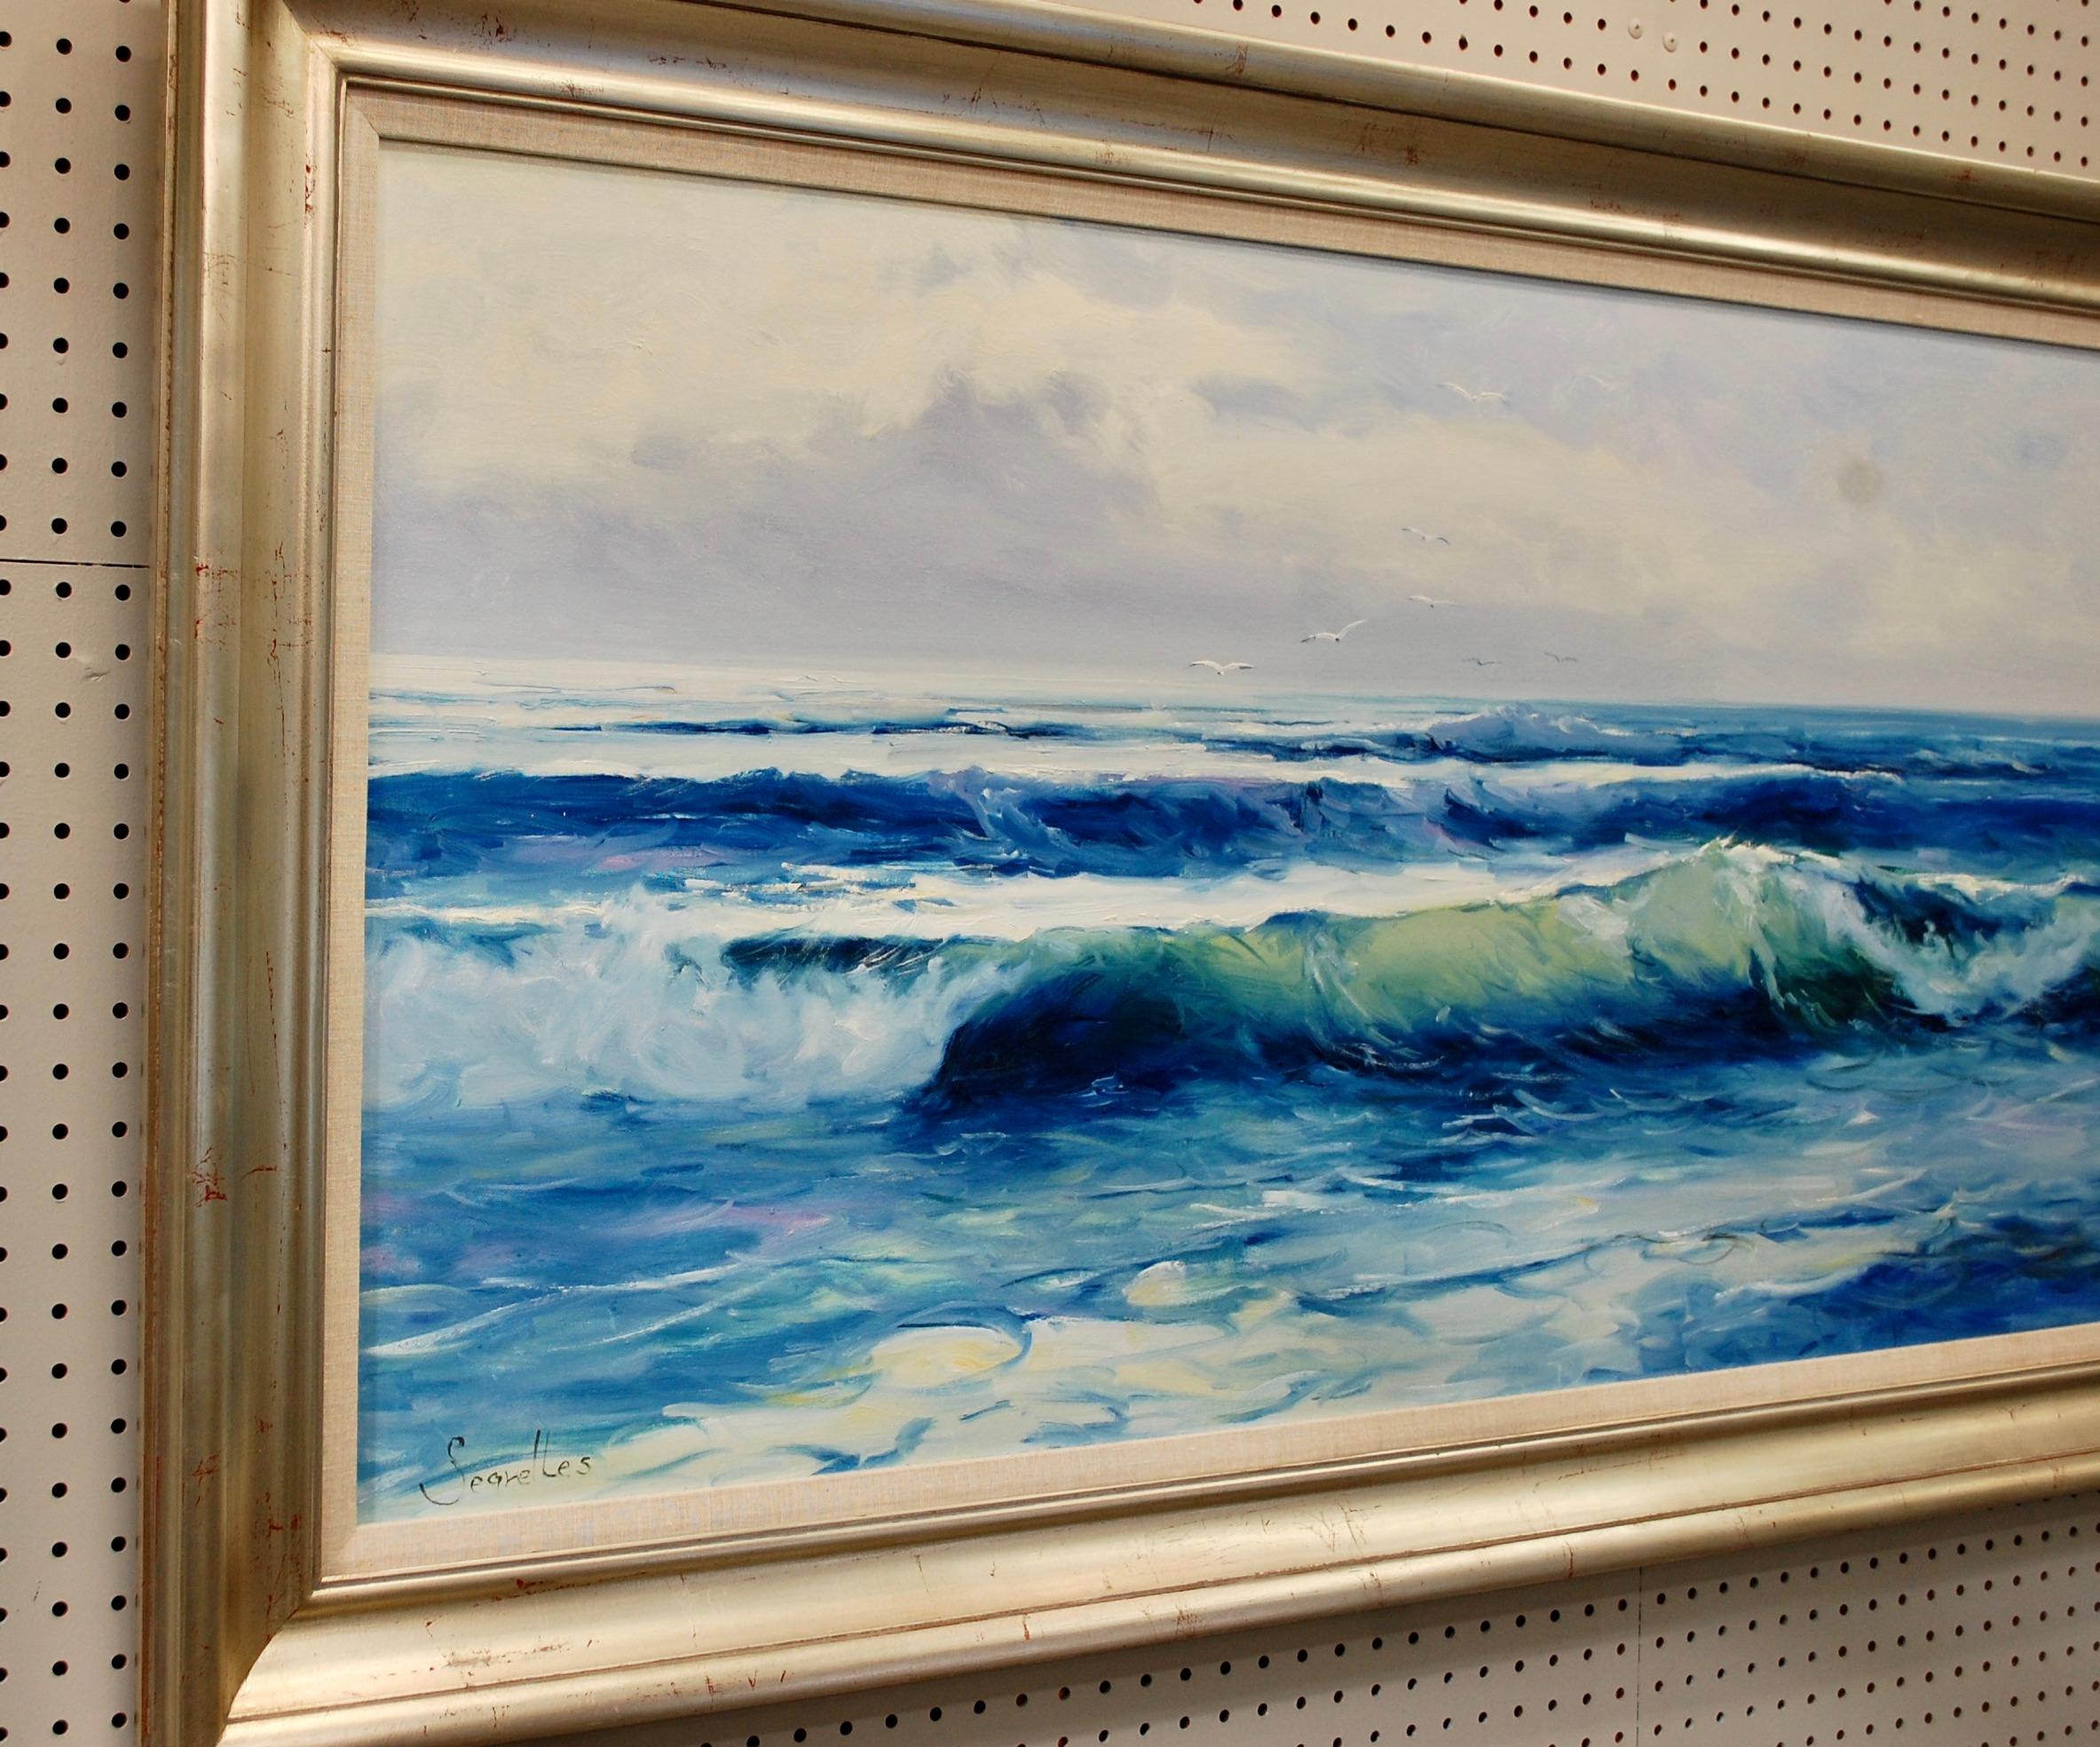  Seascape
Artist signed, silver wood frame.
Joan Segrelles was born in Barcelona, Spain in 1960. He studied at the Bellas Artes School in his home town where he discovered different techniques, materials and methods. His interest was oil painting. 